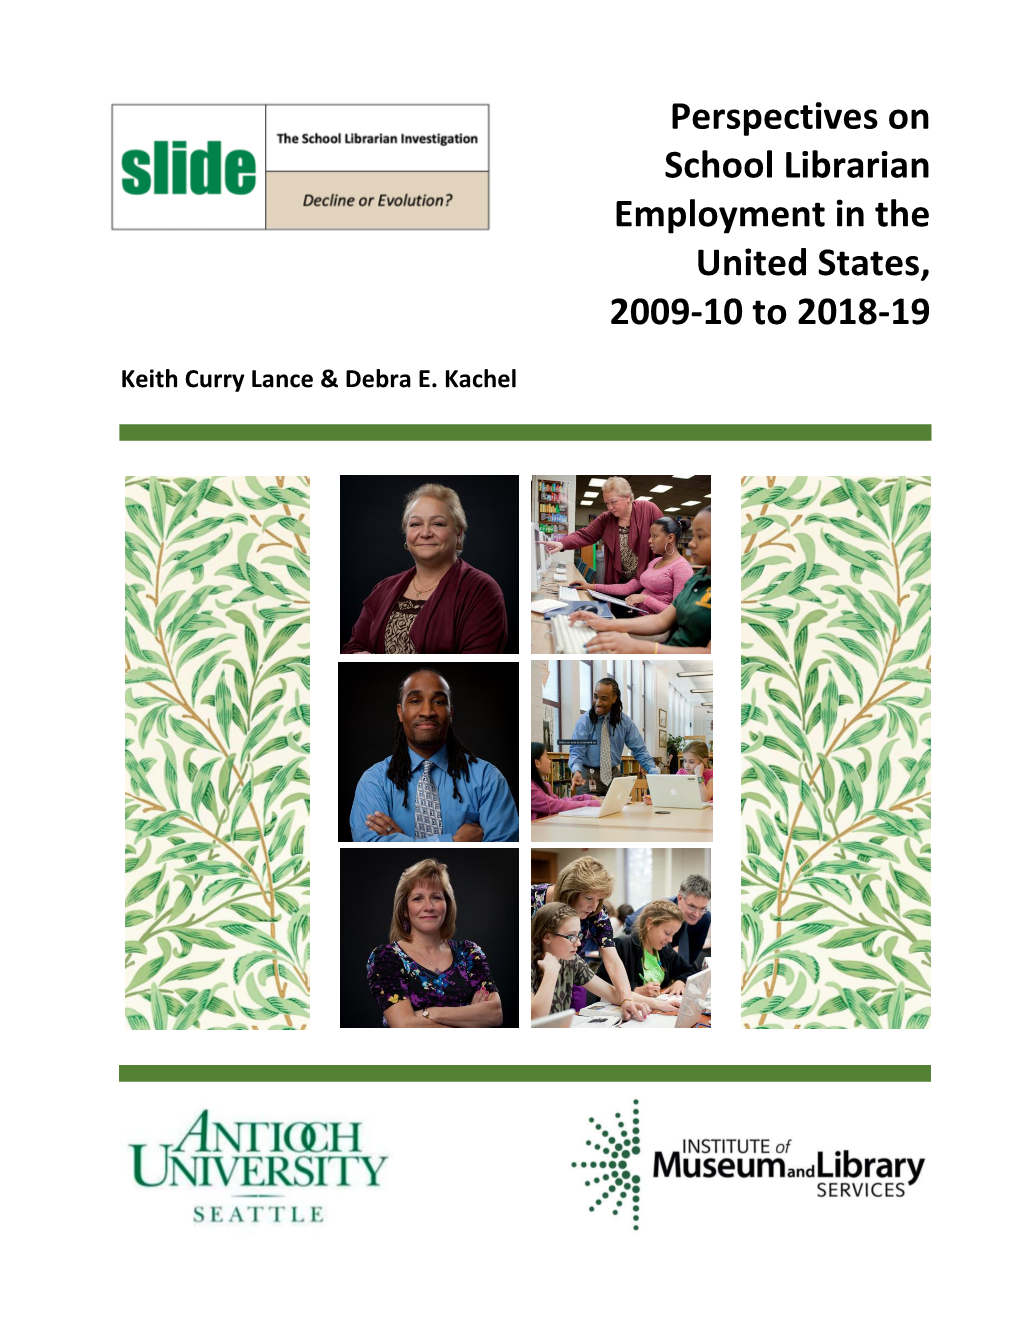 Perspectives on School Librarian Employment in the United States, 2009-10 to 2018-19